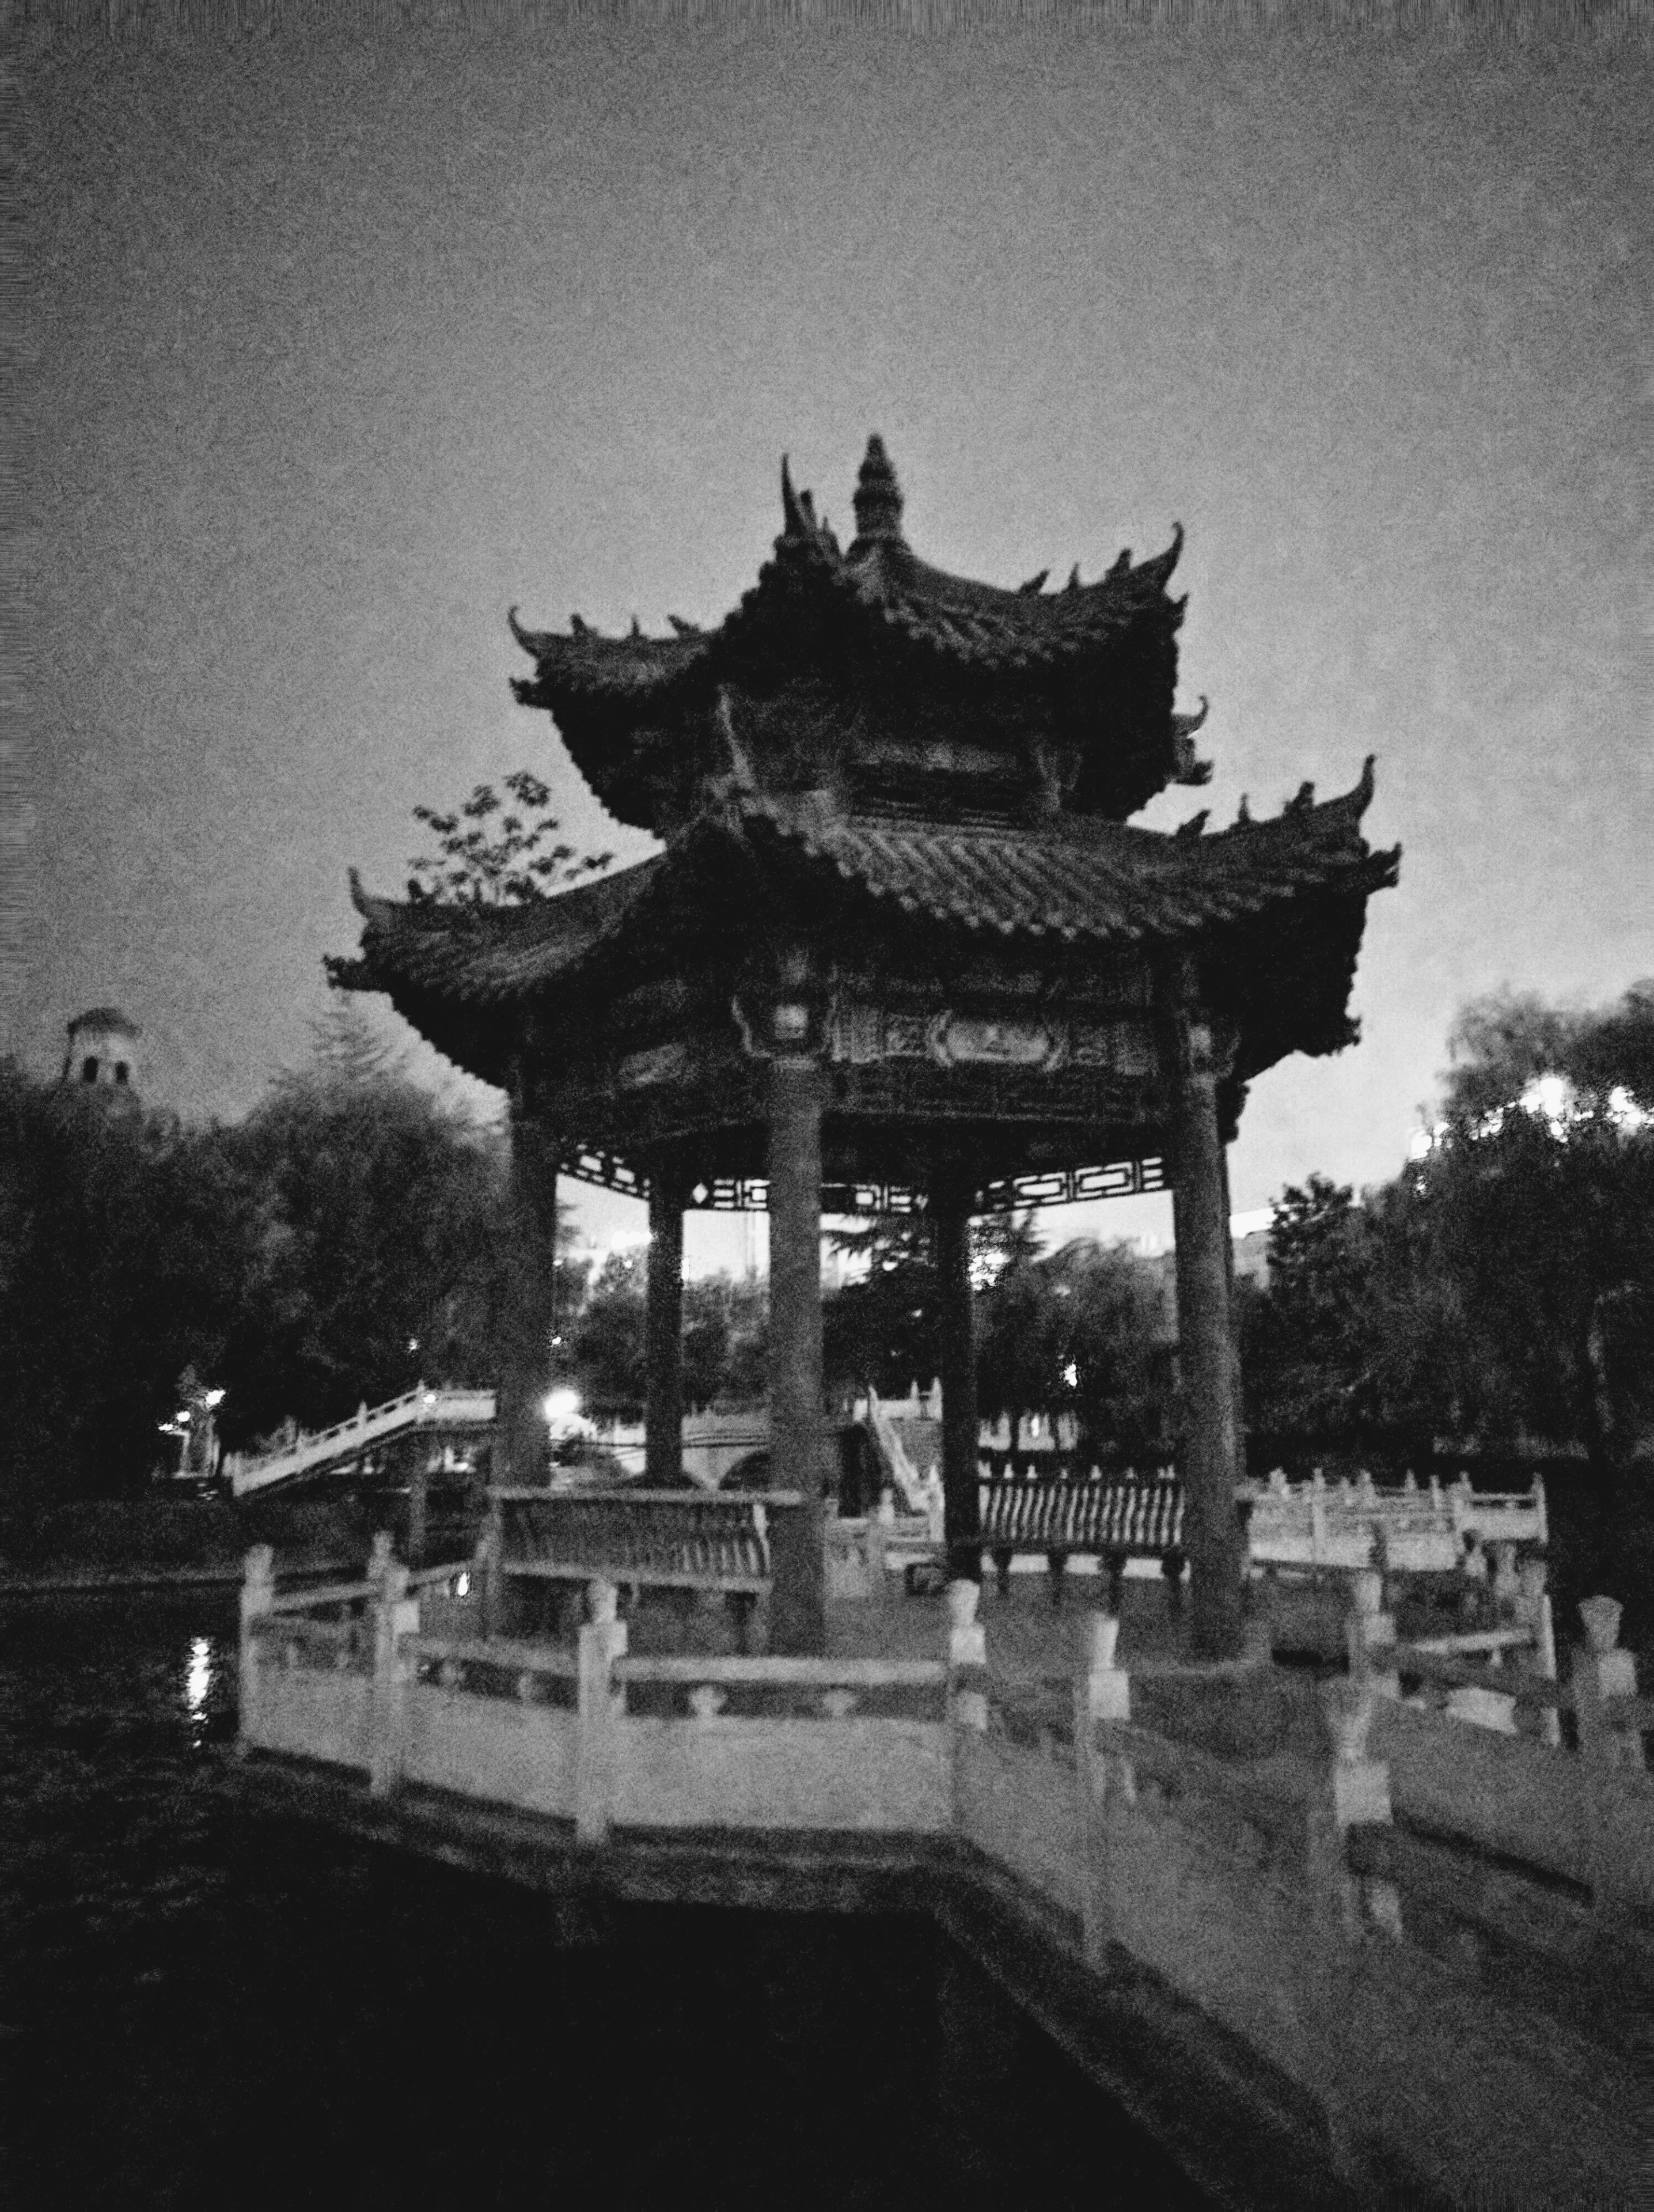 Xi'an University has beautiful gardens and small pagodas surrounded by water or grass/flowers. At night, the city lights shine bright to create a hall around this one. #pagodas #china #travel #xian #blackandwhite